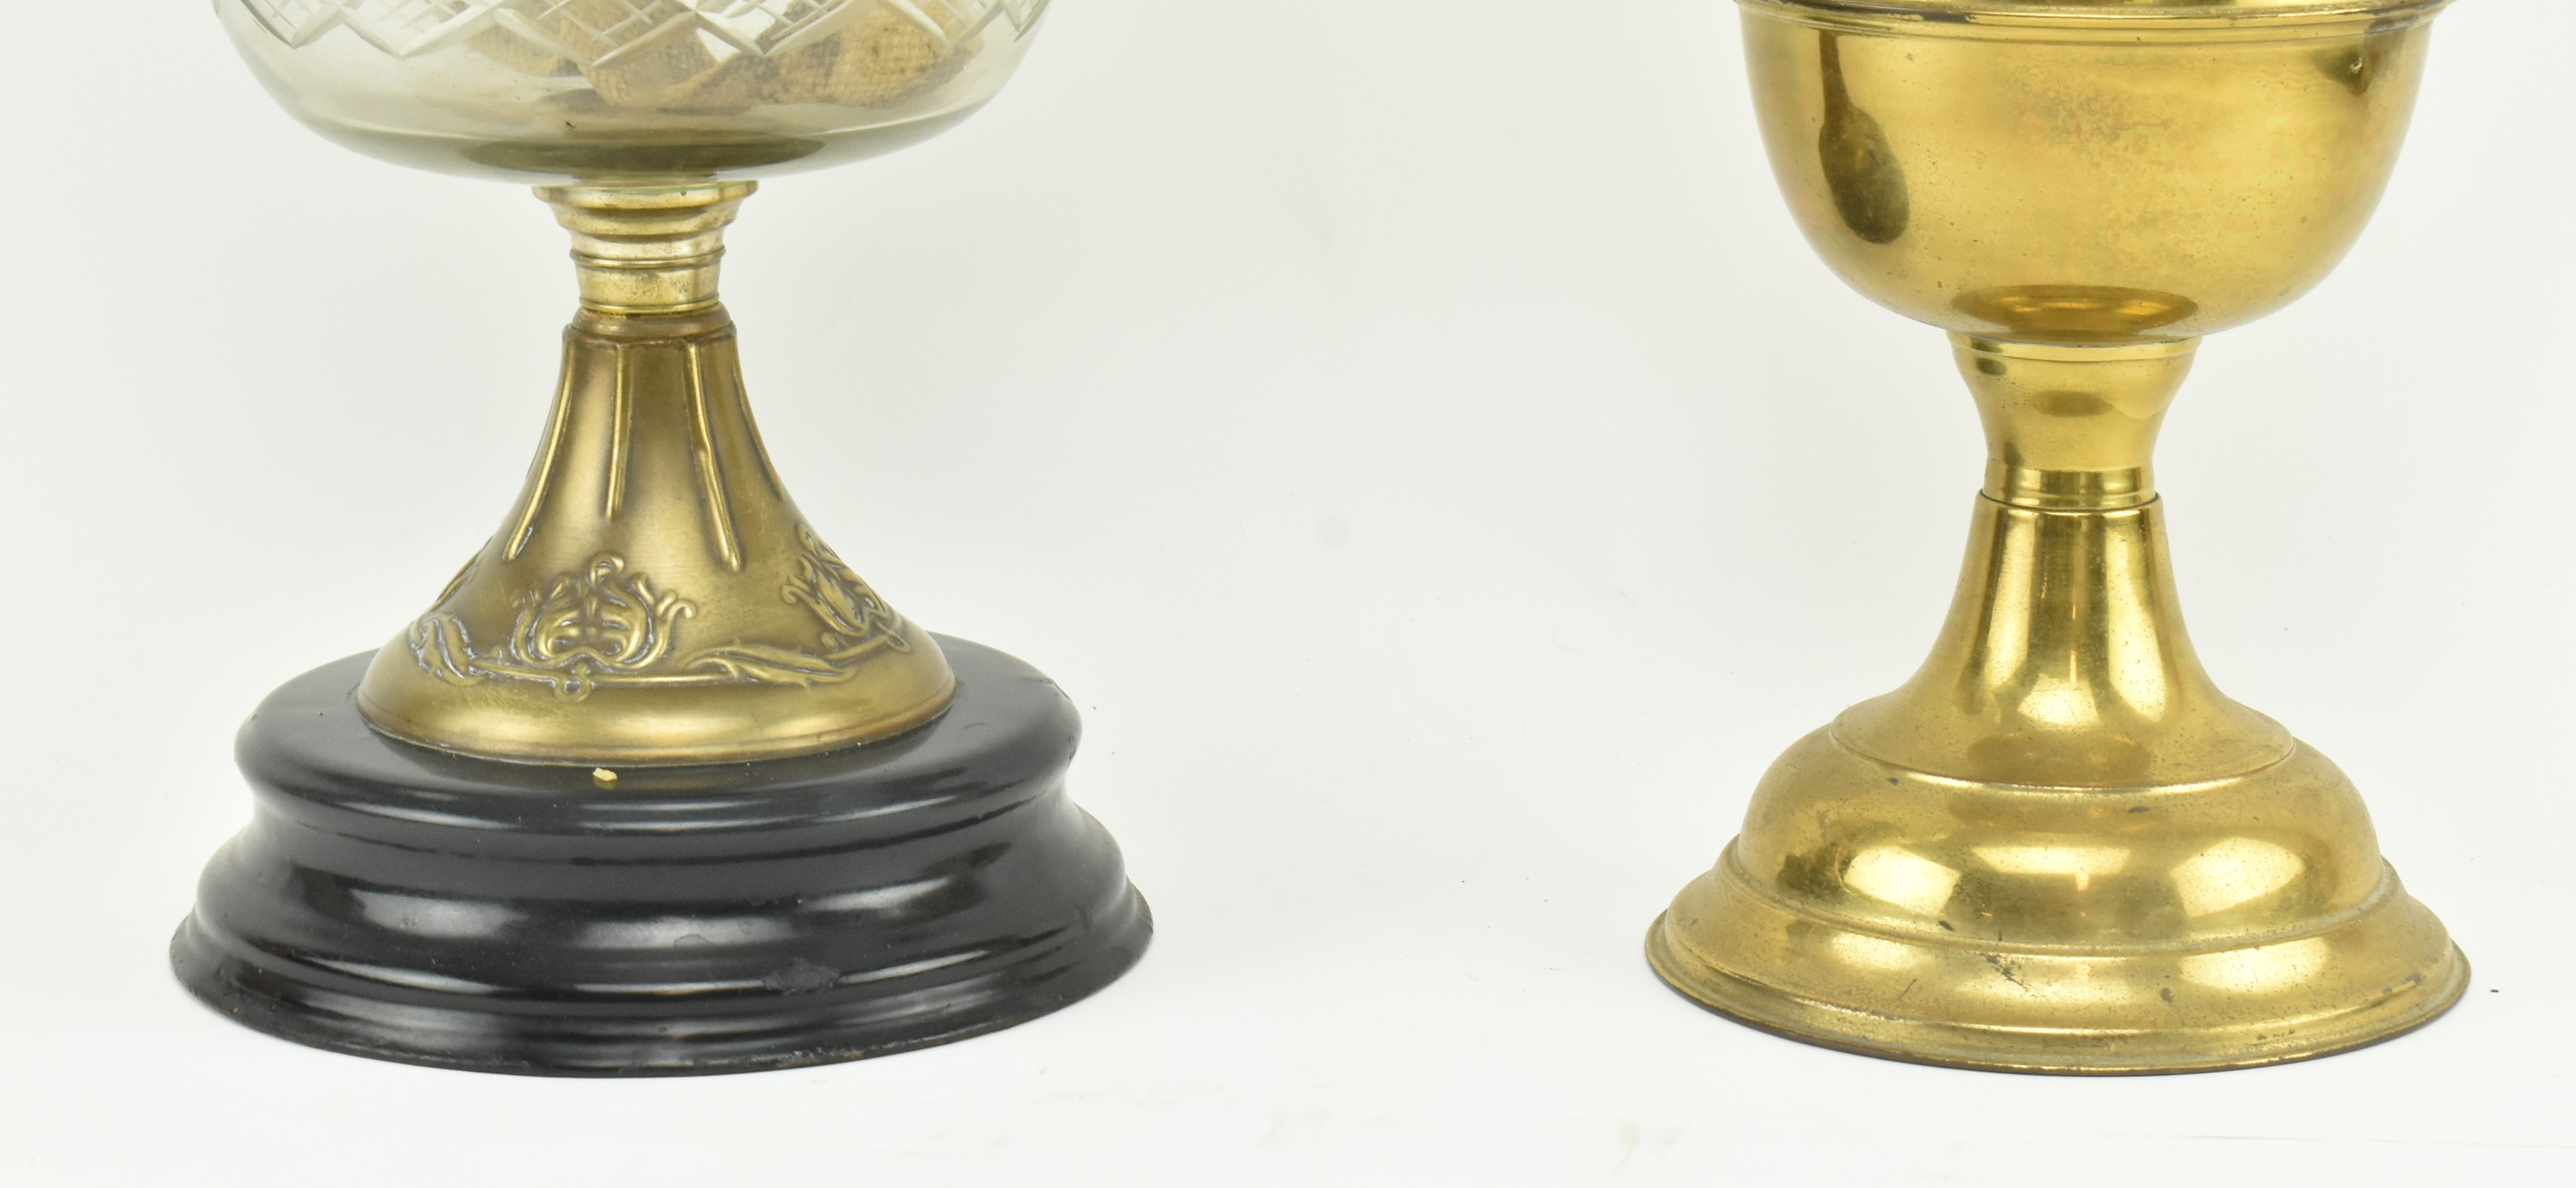 TWO VINTAGE 20TH CENTURY DUPLEX OIL LAMPS - Image 4 of 7